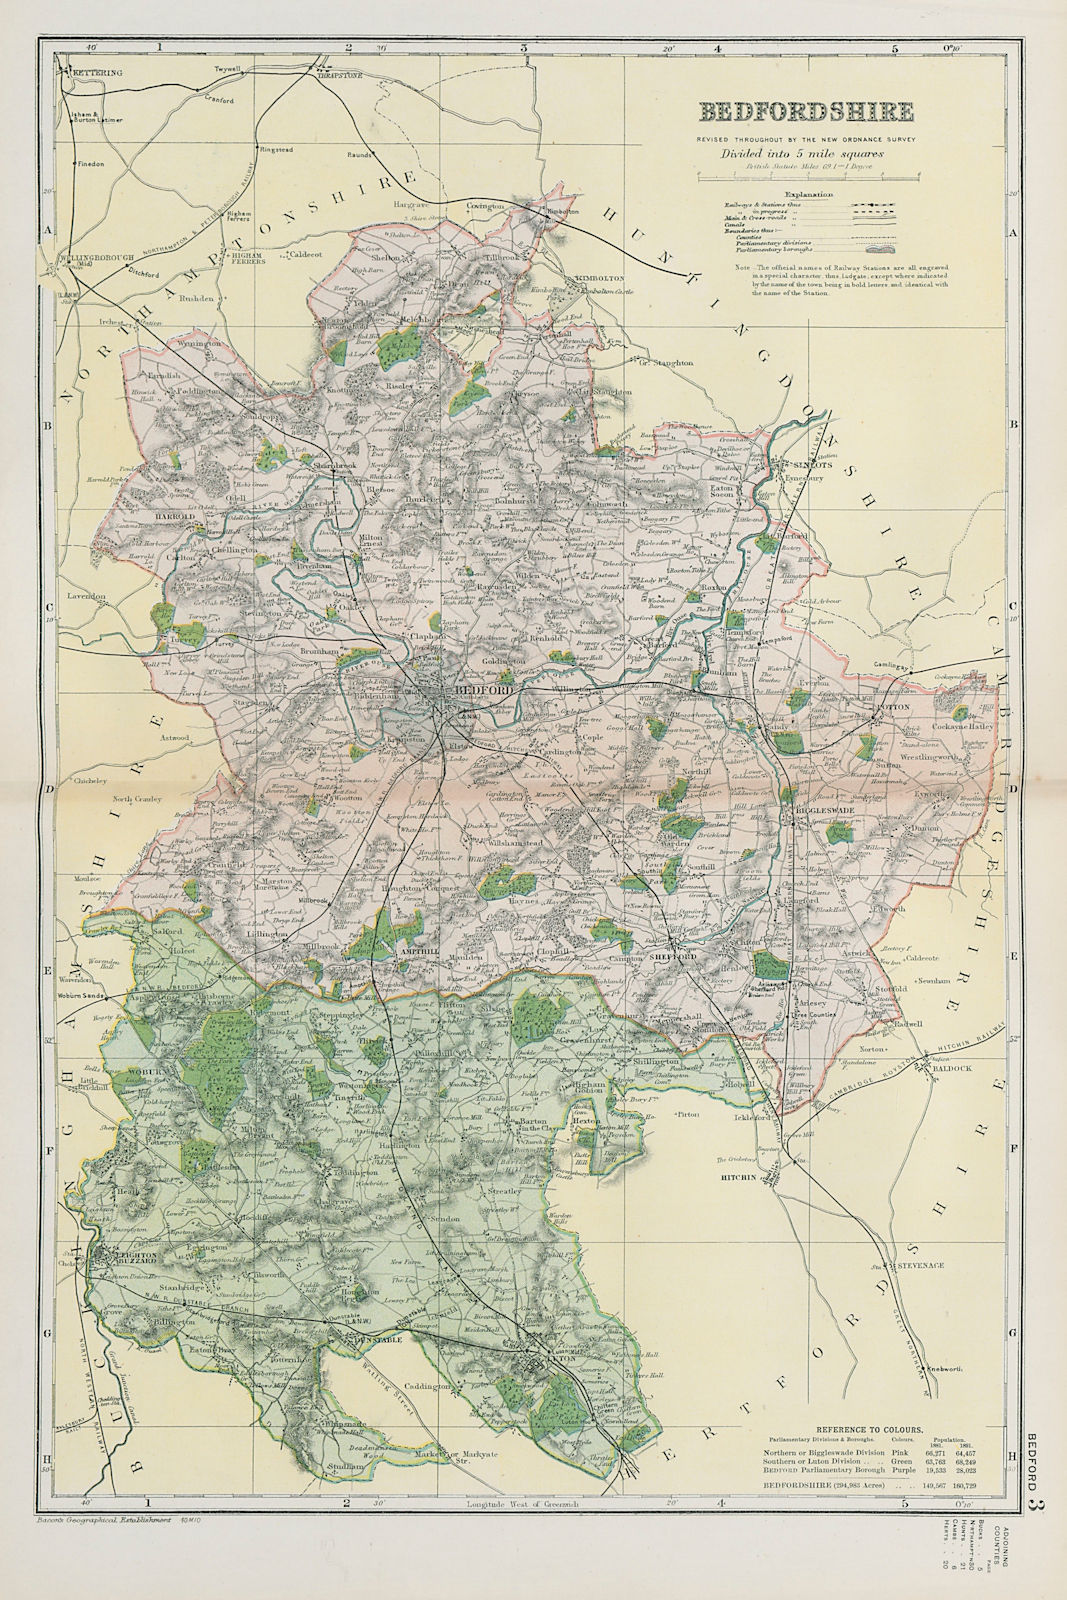 BEDFORDSHIRE. Showing Parliamentary divisions, boroughs & parks. BACON 1900 map